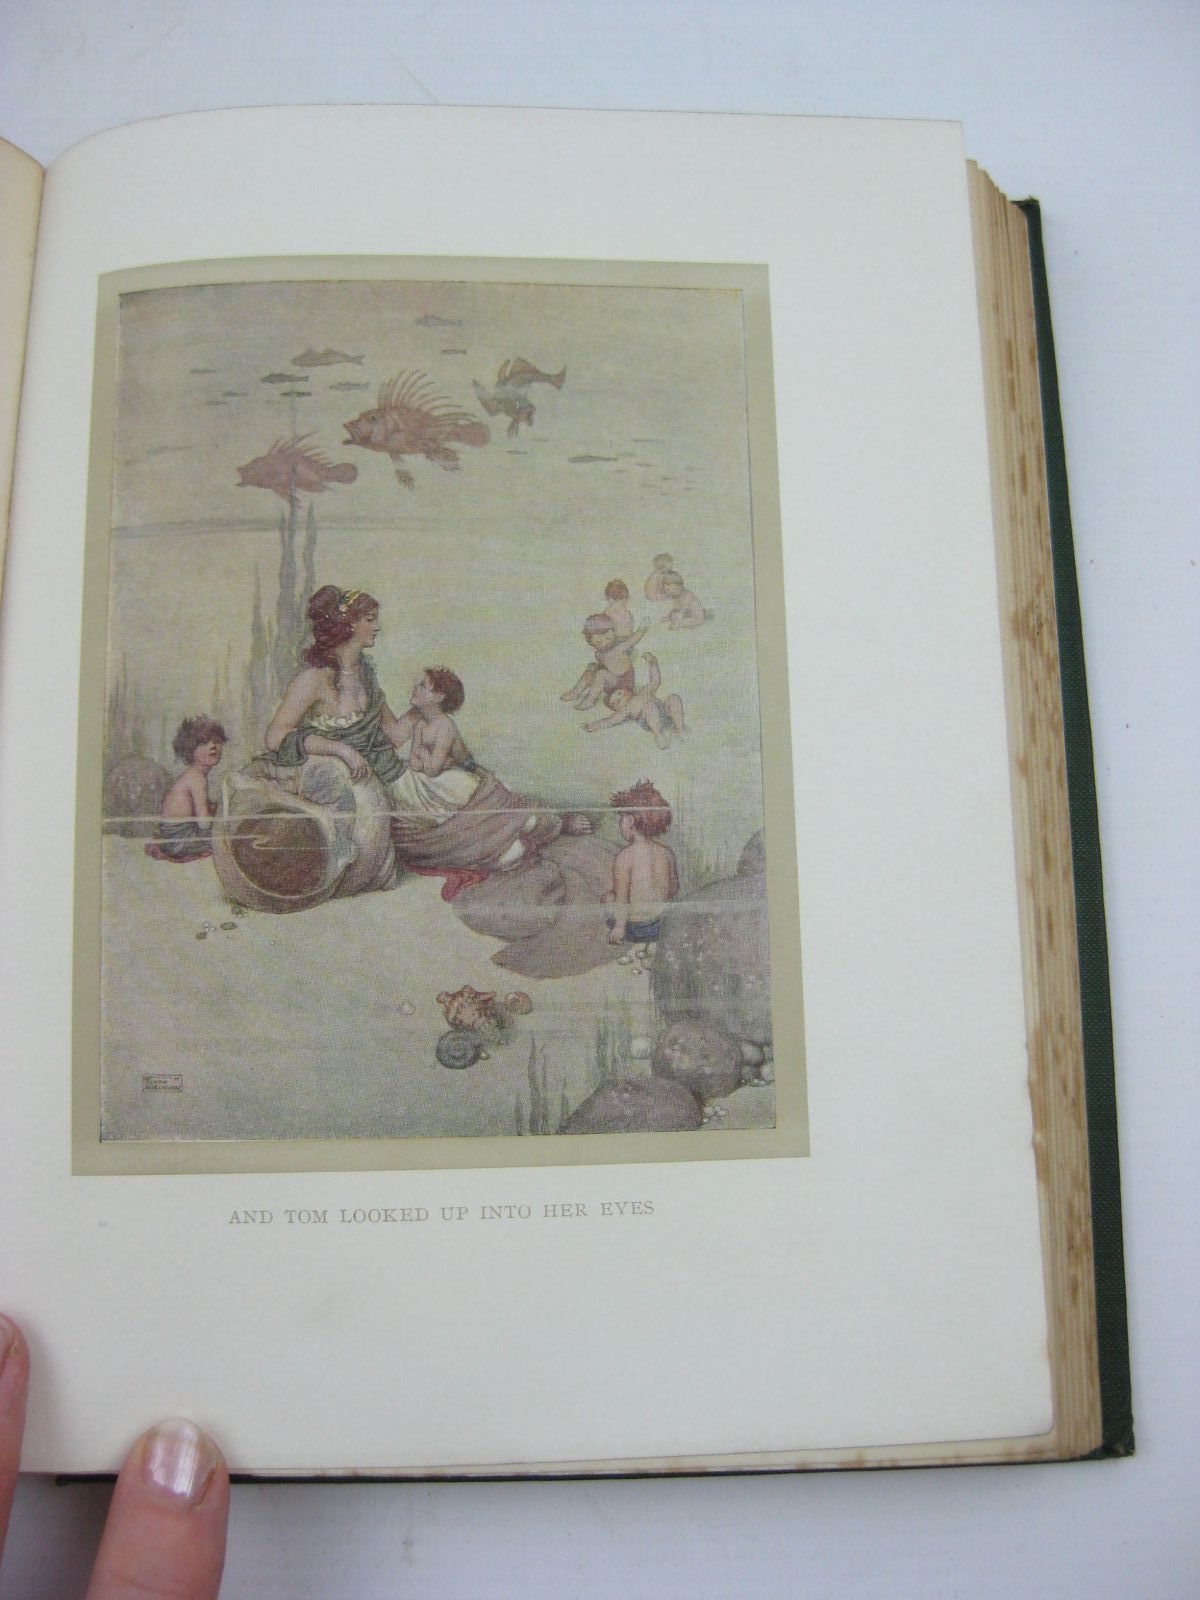 Photo of THE WATER-BABIES written by Kingsley, Charles illustrated by Robinson, W. Heath published by Constable & Co. Ltd. (STOCK CODE: 1406768)  for sale by Stella & Rose's Books